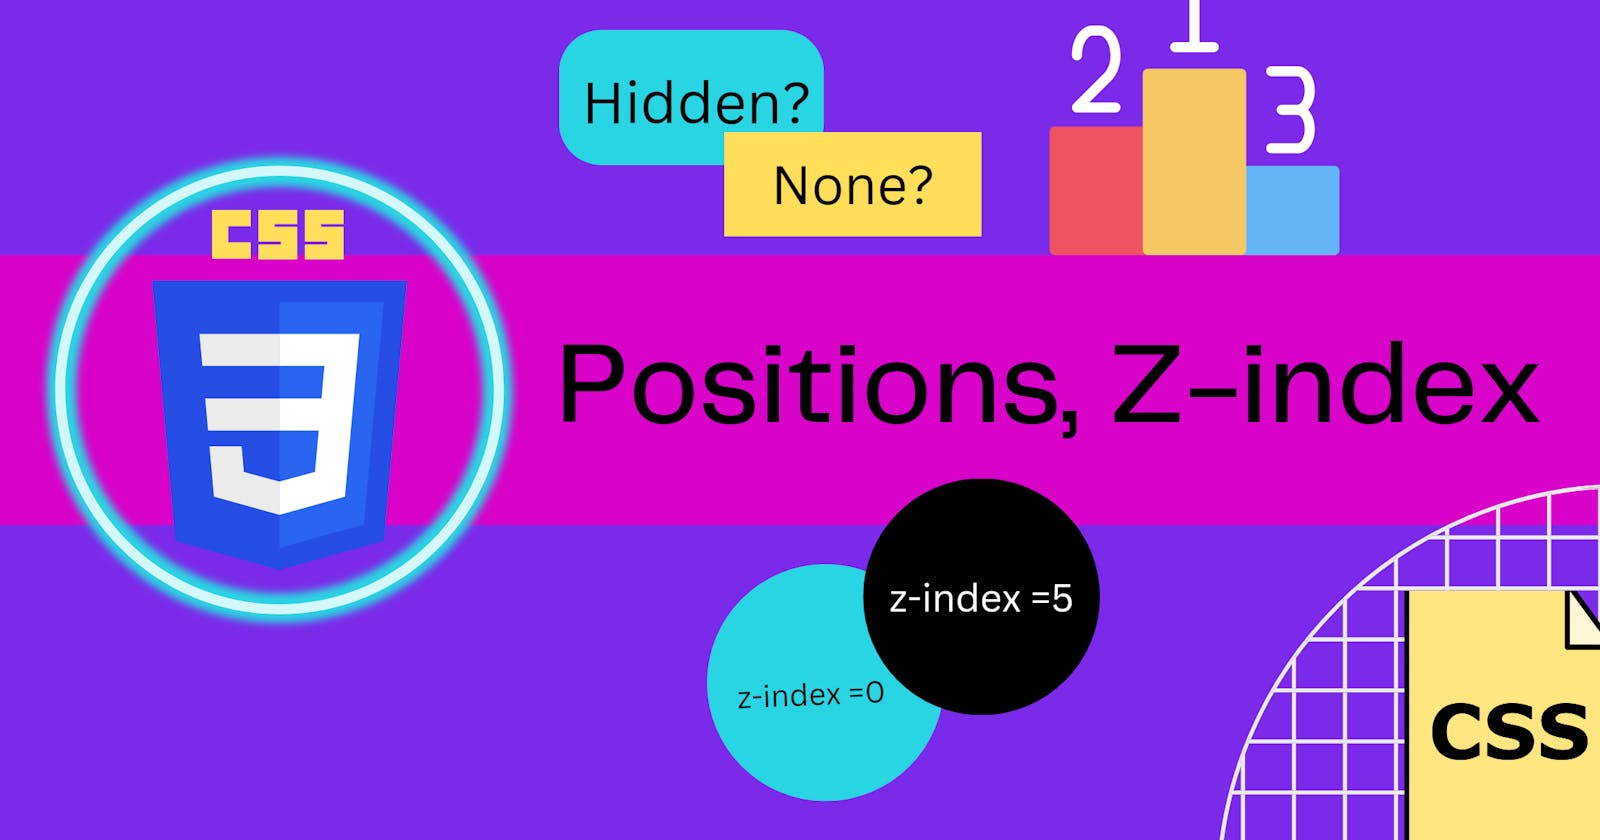 Positions, Visibility, Z-index: